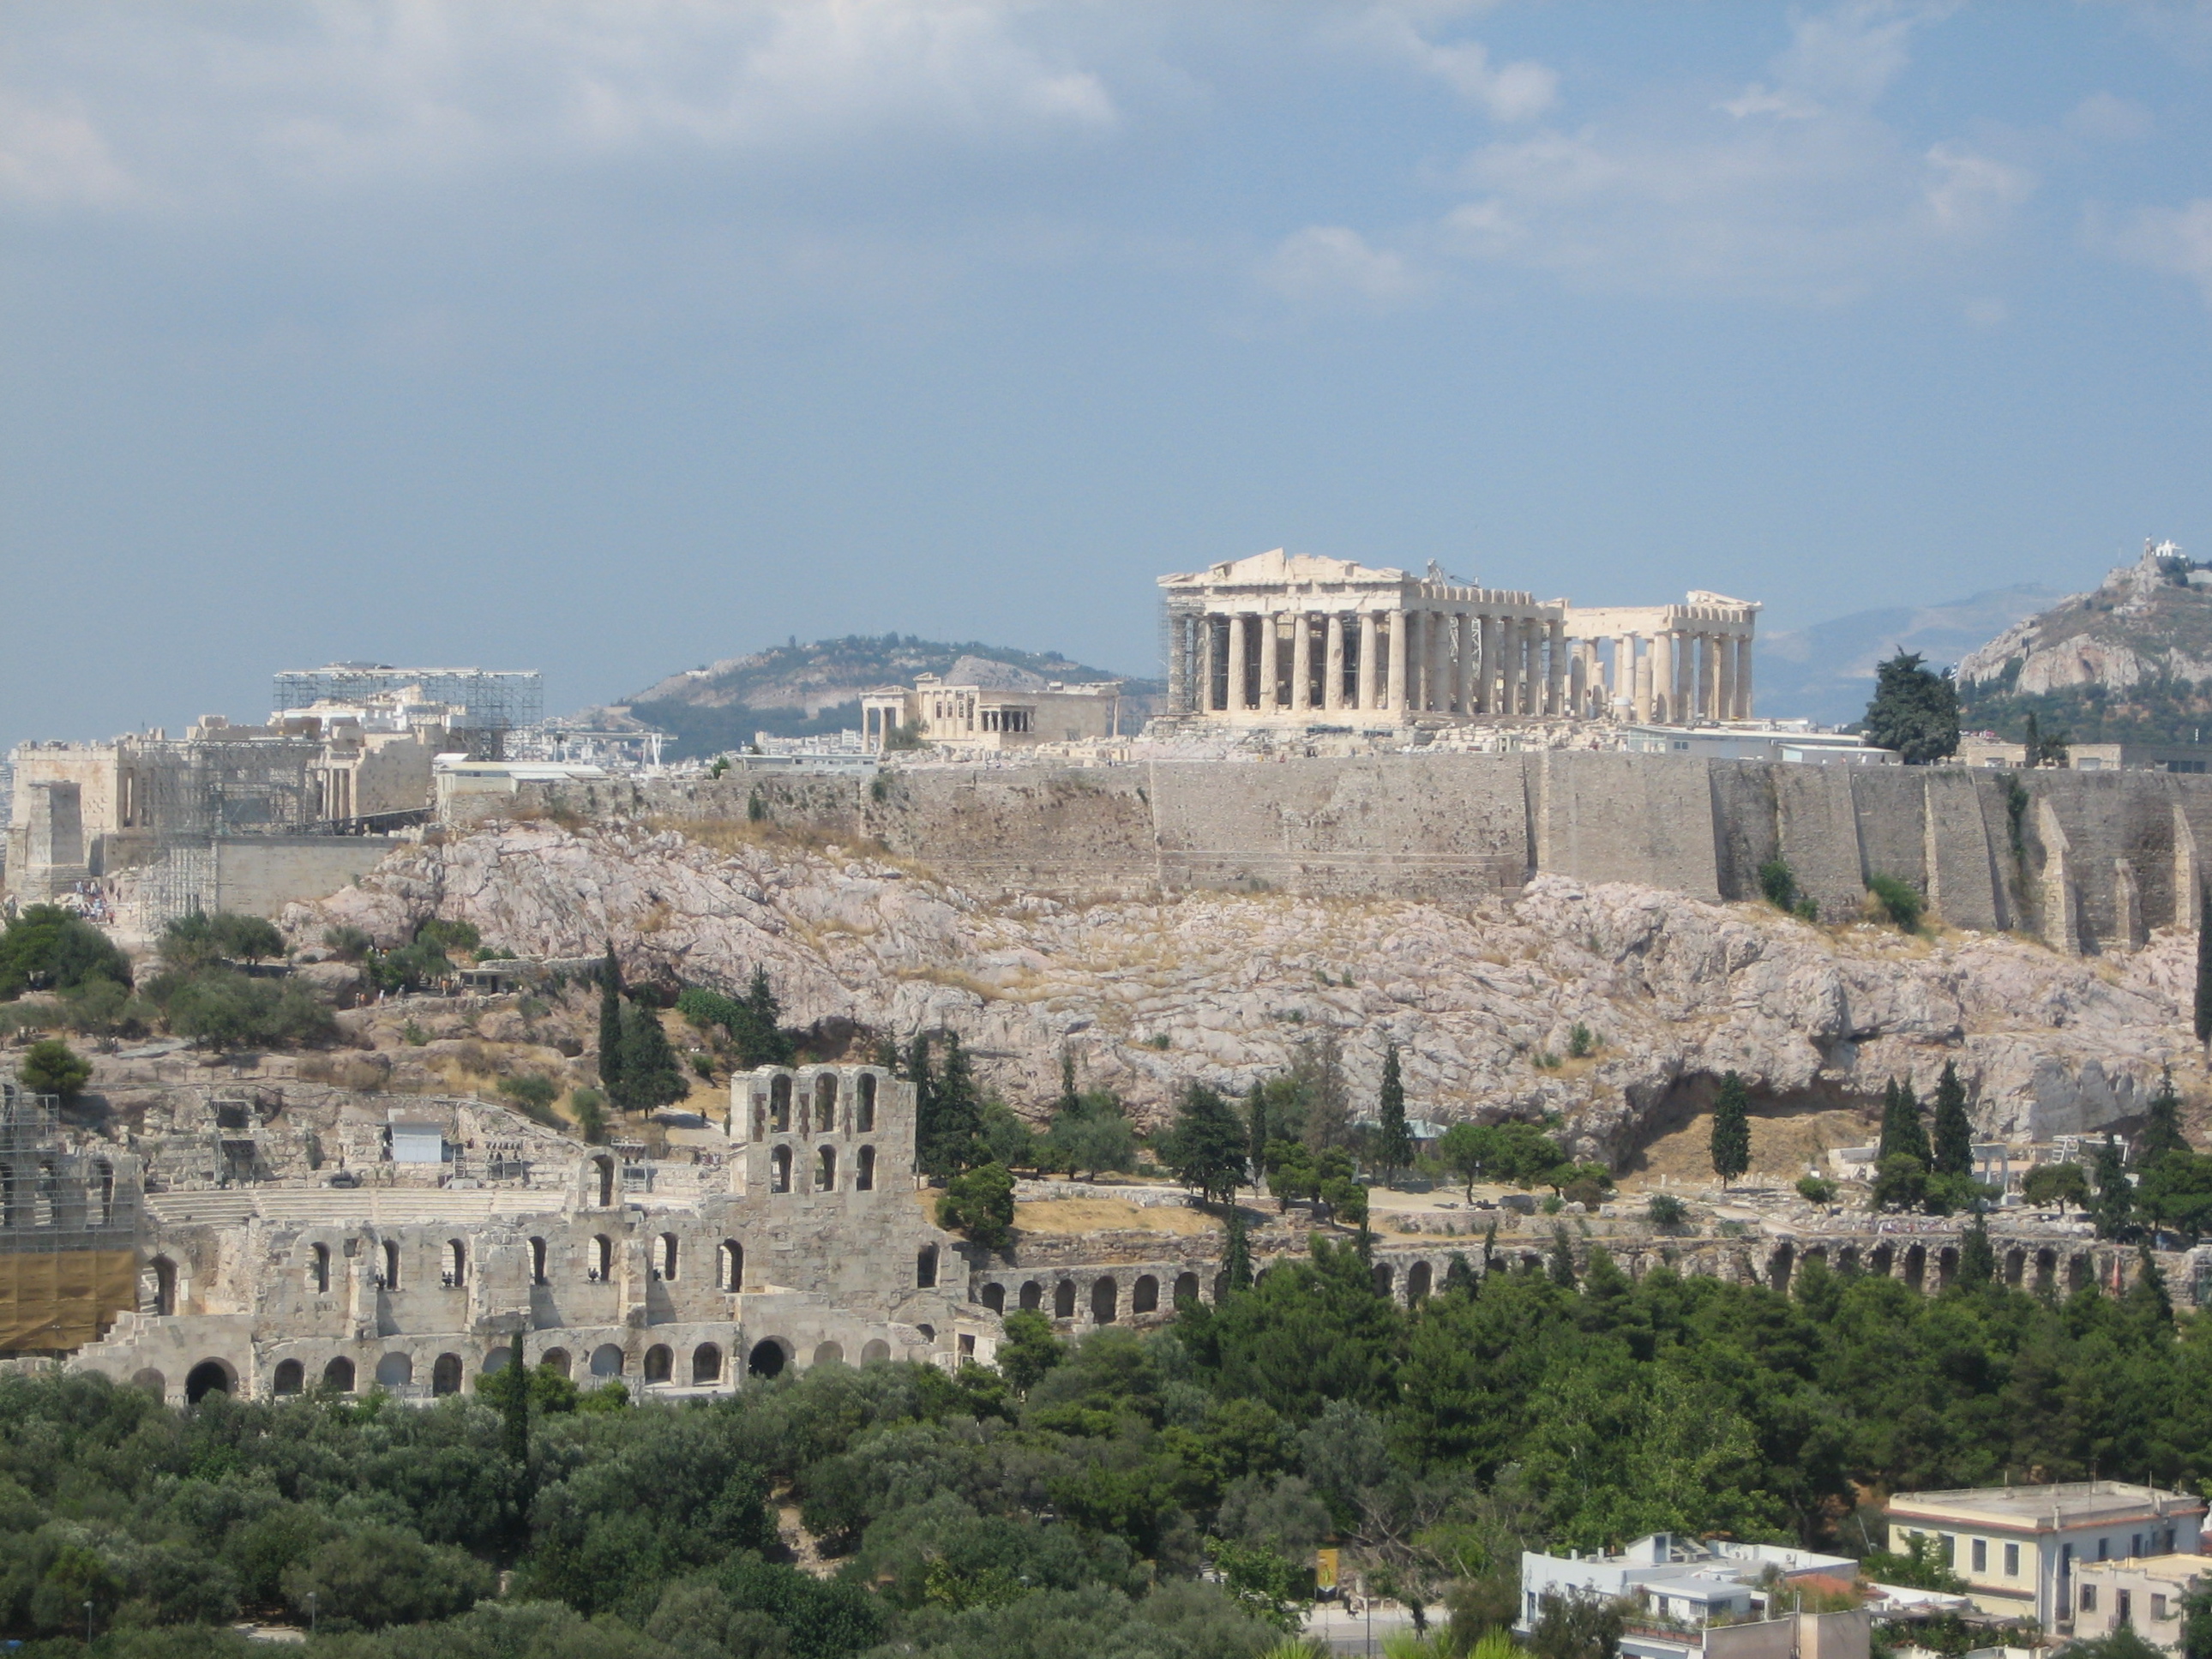 The Acropolis of Athens in Greece